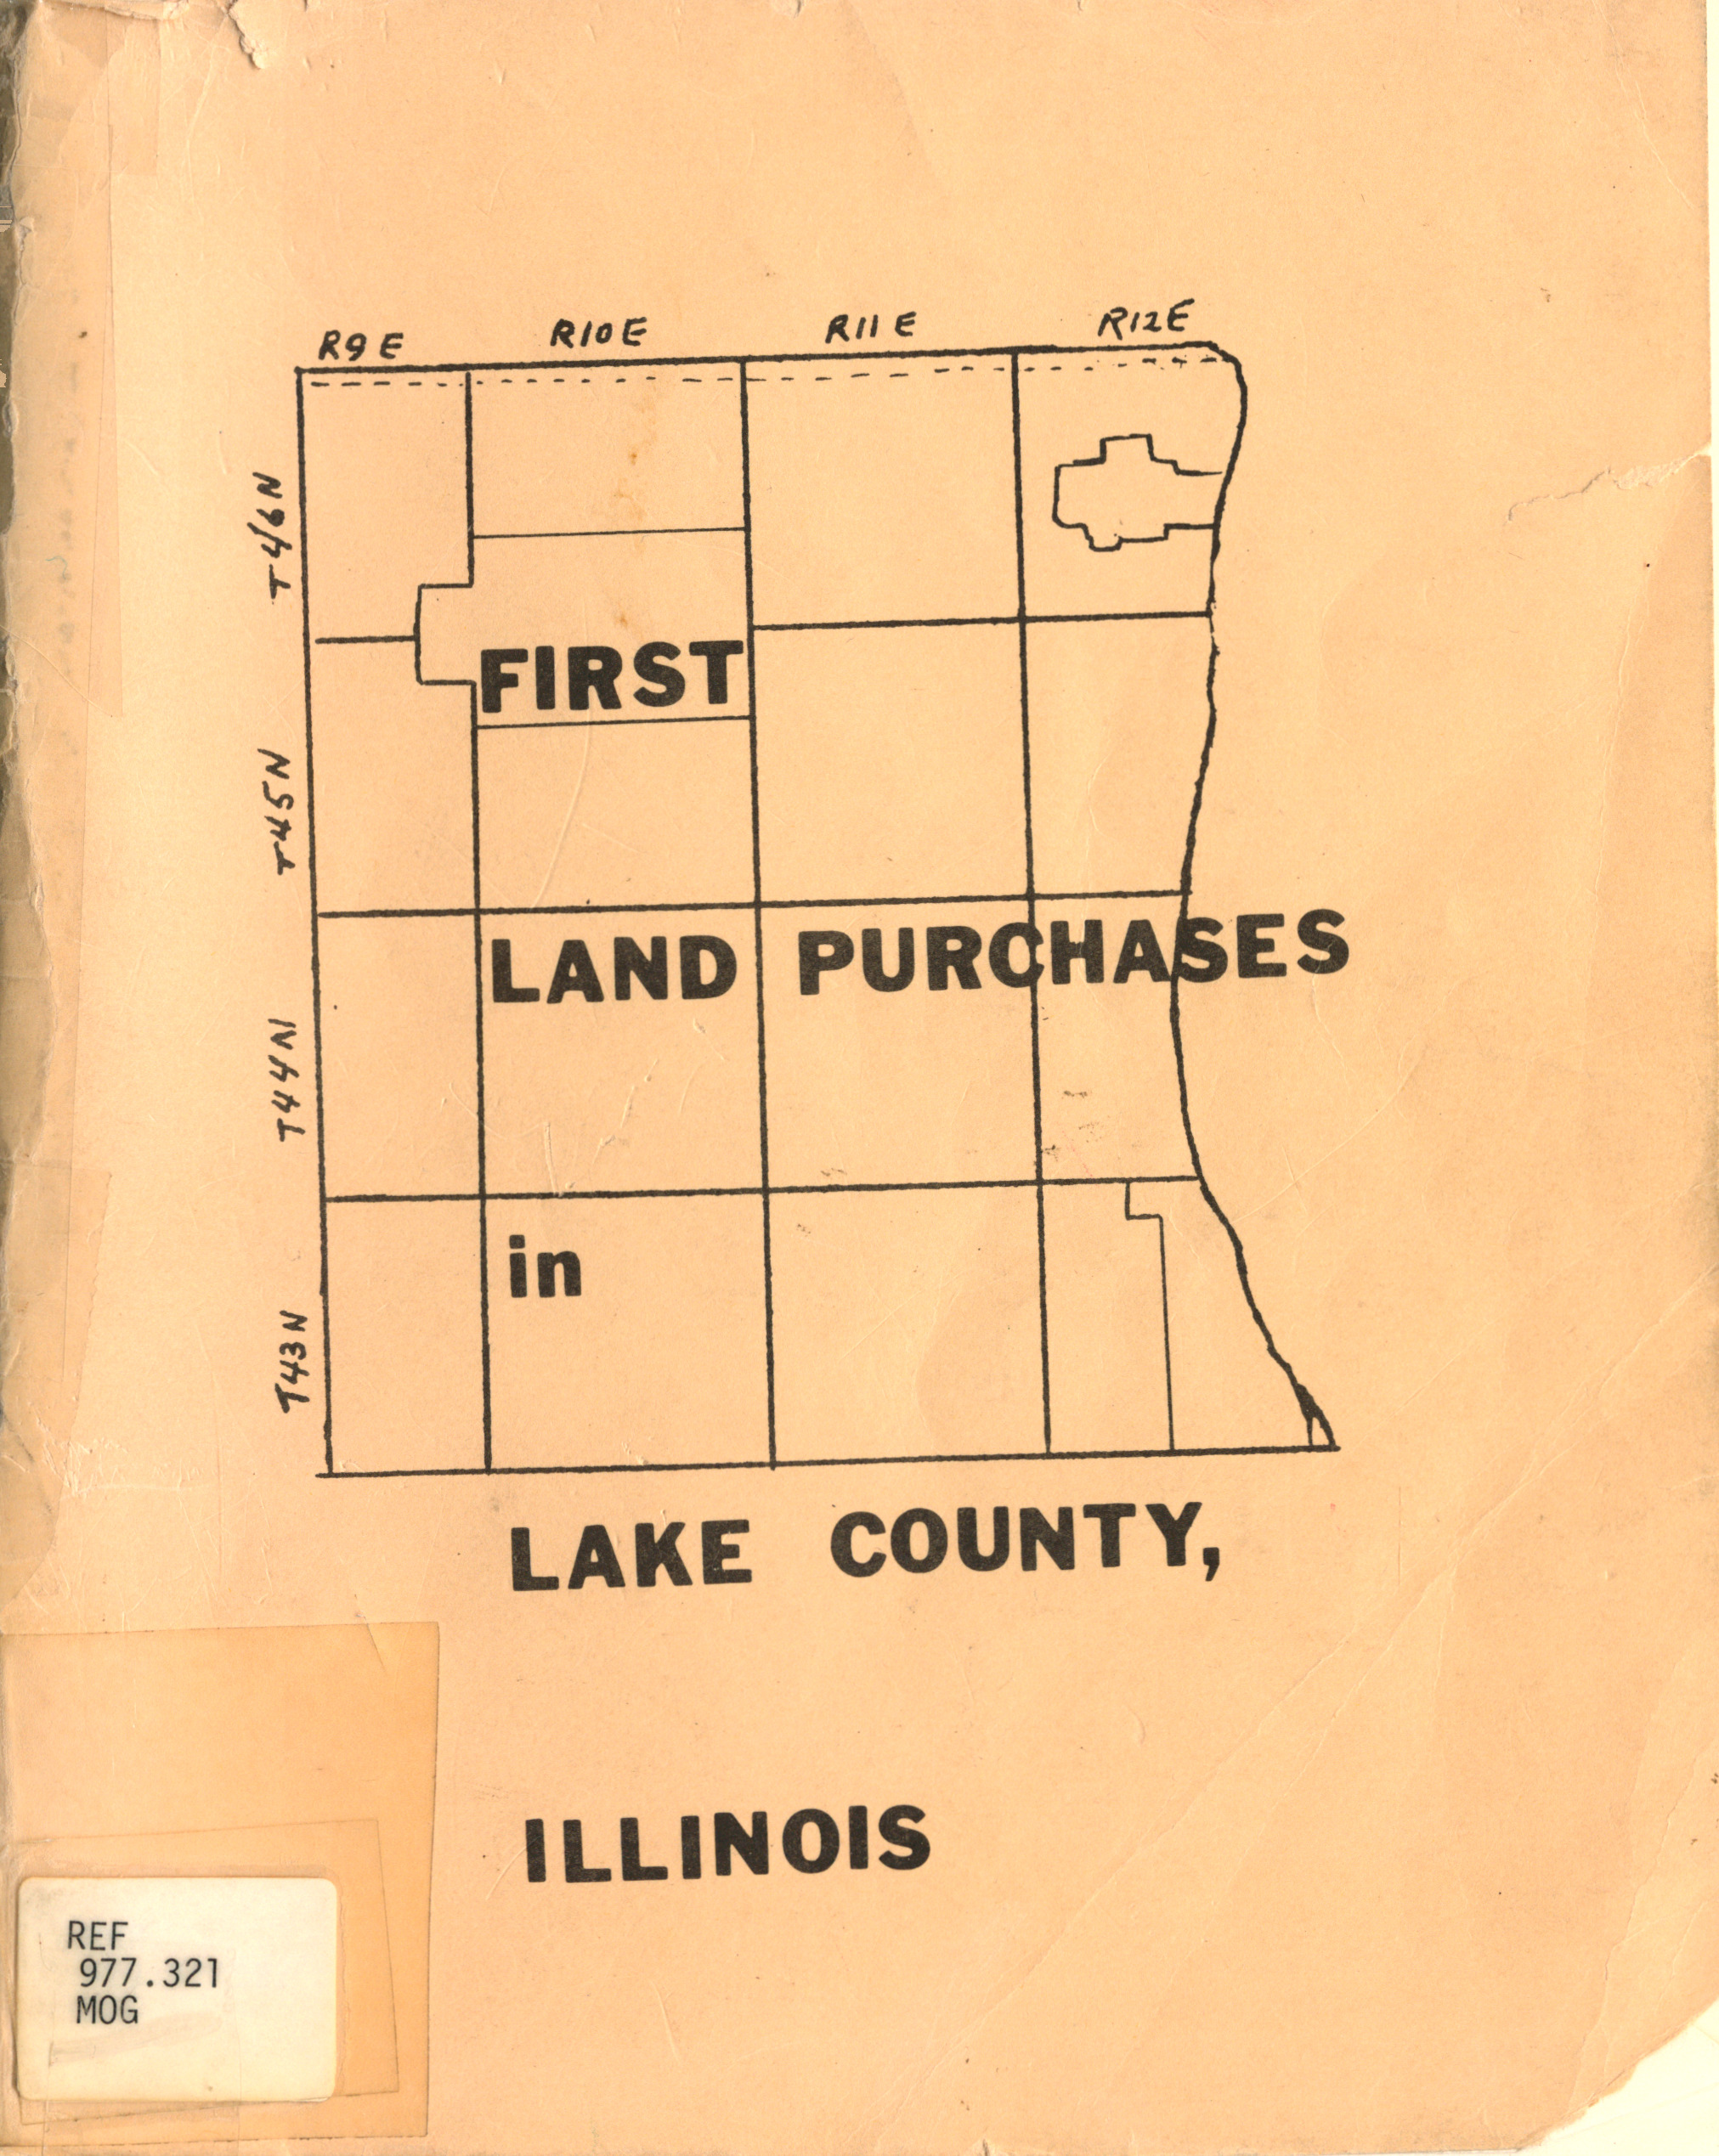 Image for "First Land Purchases in Lake County, Illinois"